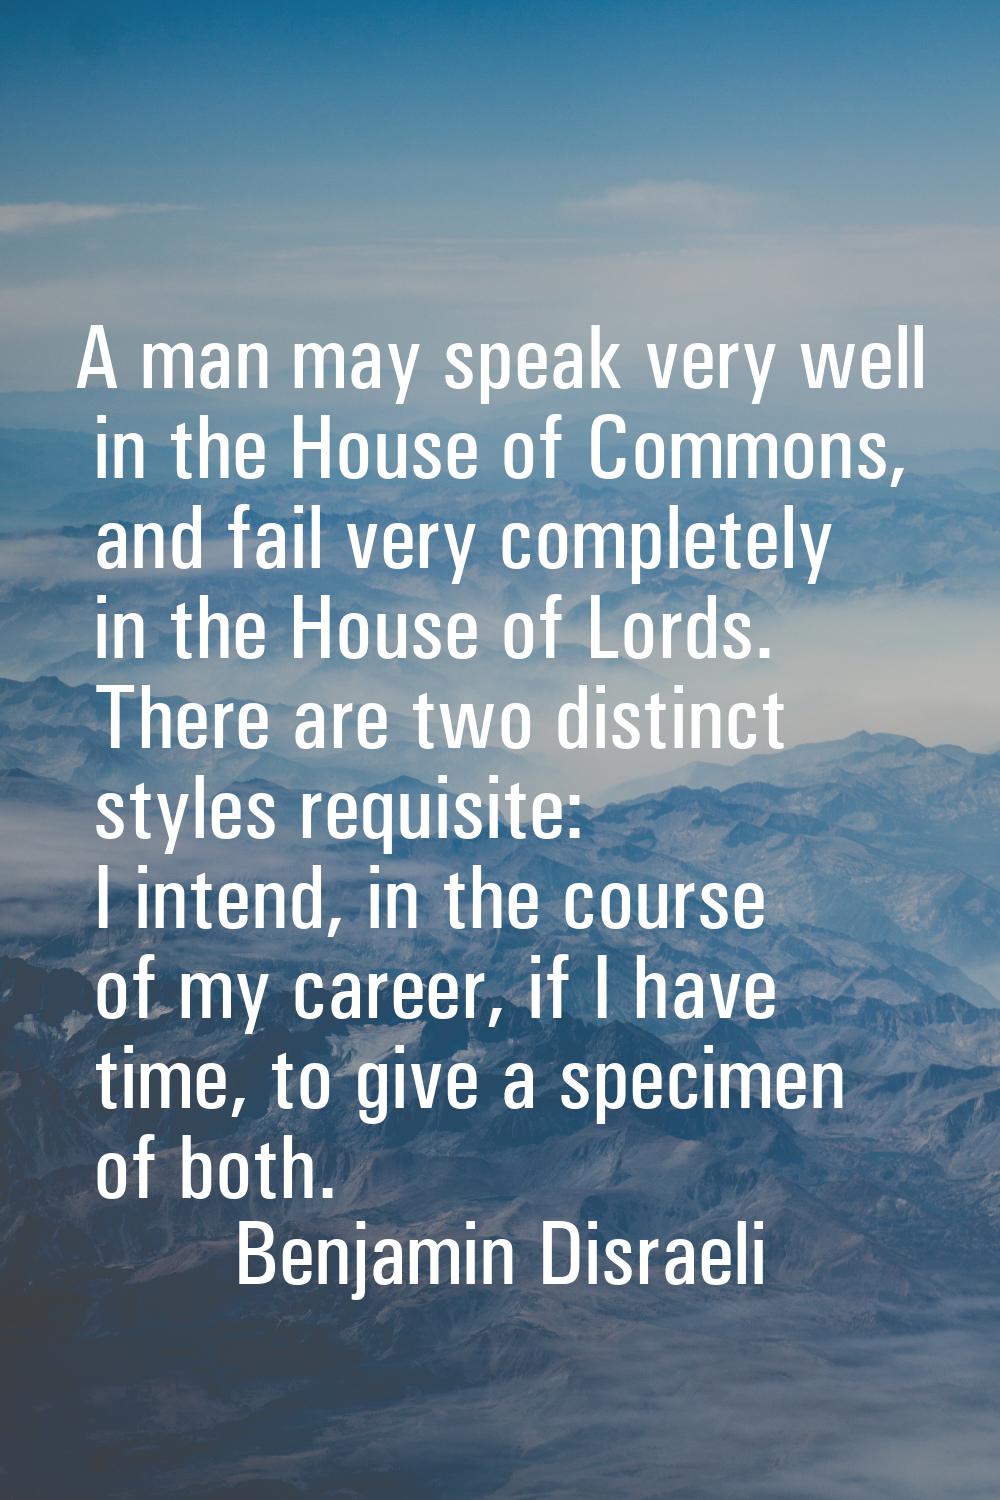 A man may speak very well in the House of Commons, and fail very completely in the House of Lords. 